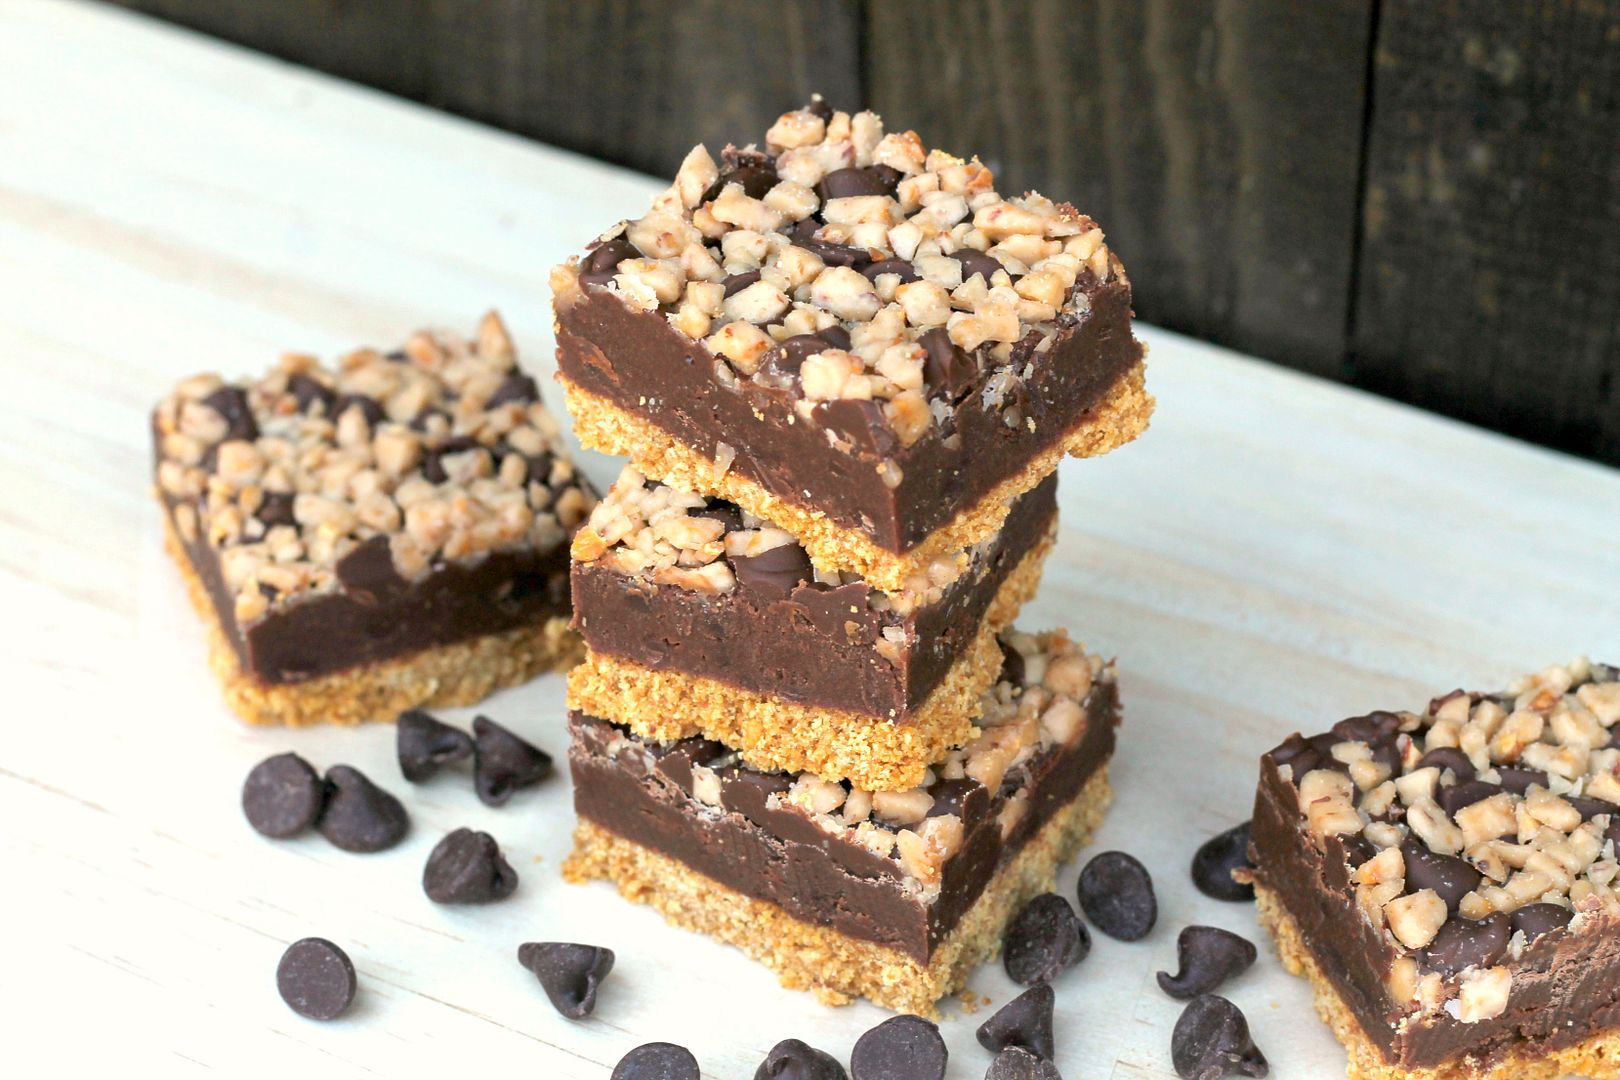 These Hershey's Toffee Fudge Bars are to die for!! They're no-bake and come together super quickly plus are easy enough for the kids to help you make. These are absolutely going to be a permanent addition to our holiday baking list! #NewTraditions #ad